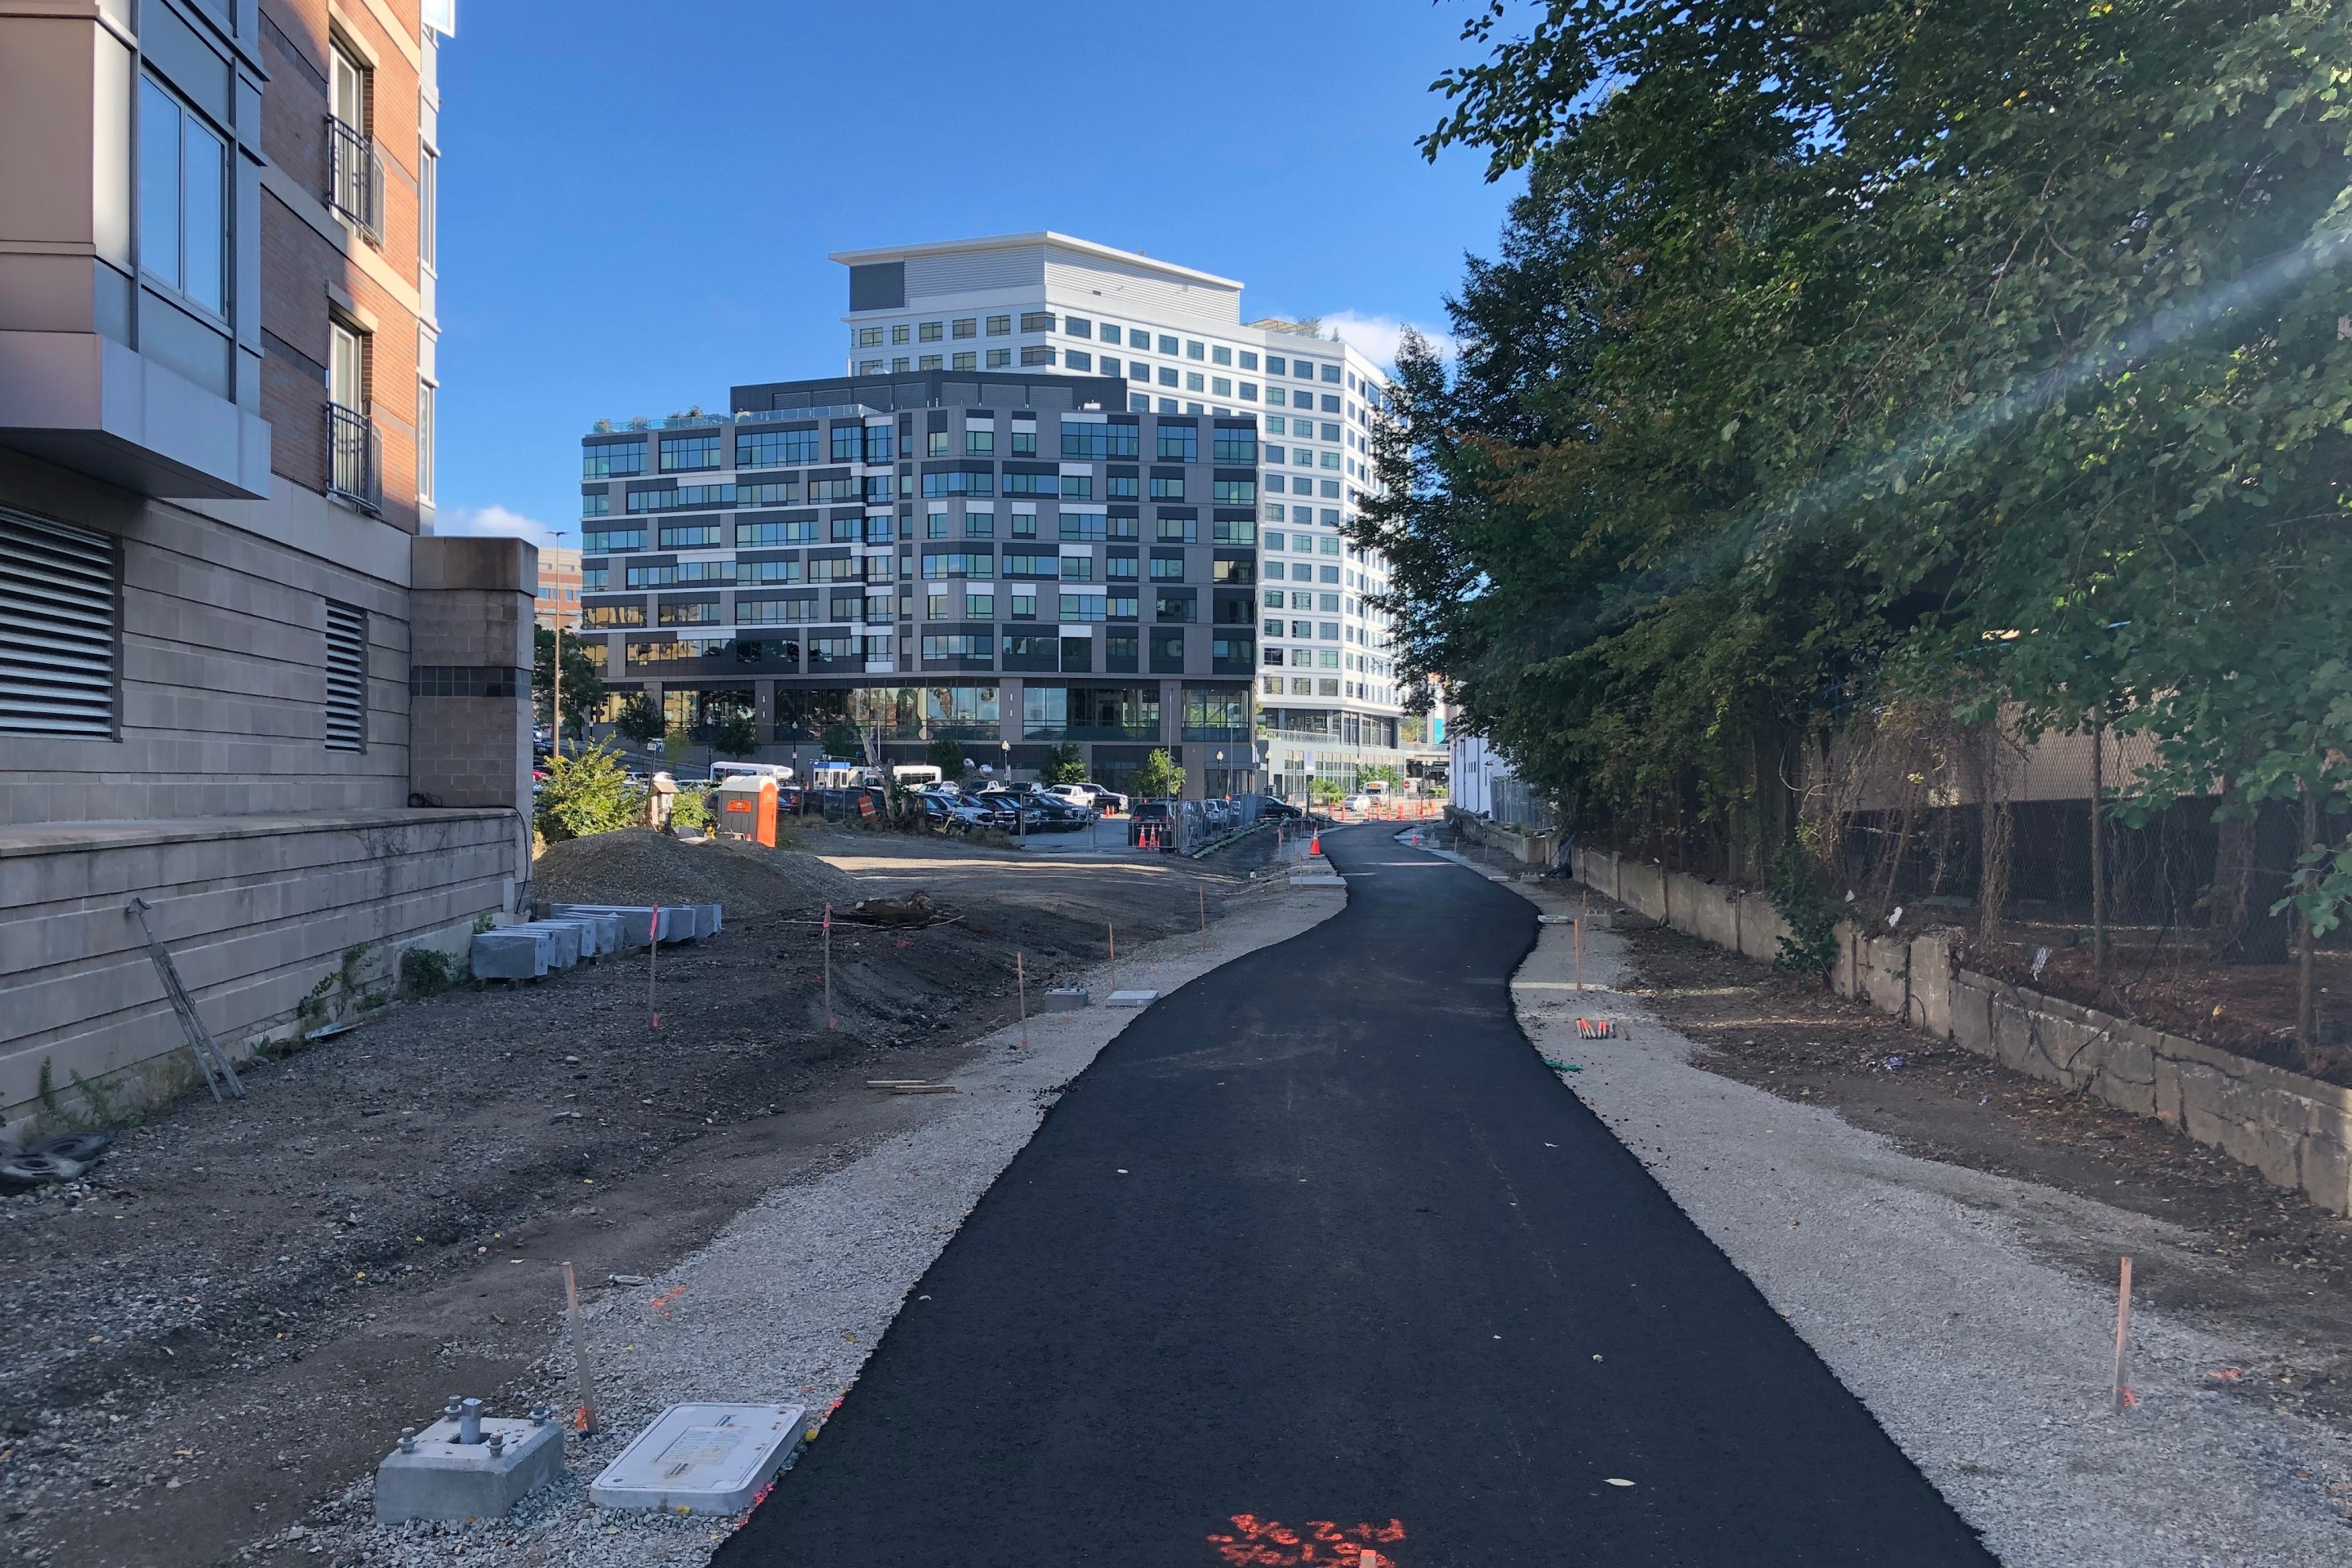 Fresh pavement on an under-construction bike path. In the distance are two new tall buildings near Kenmore Square.